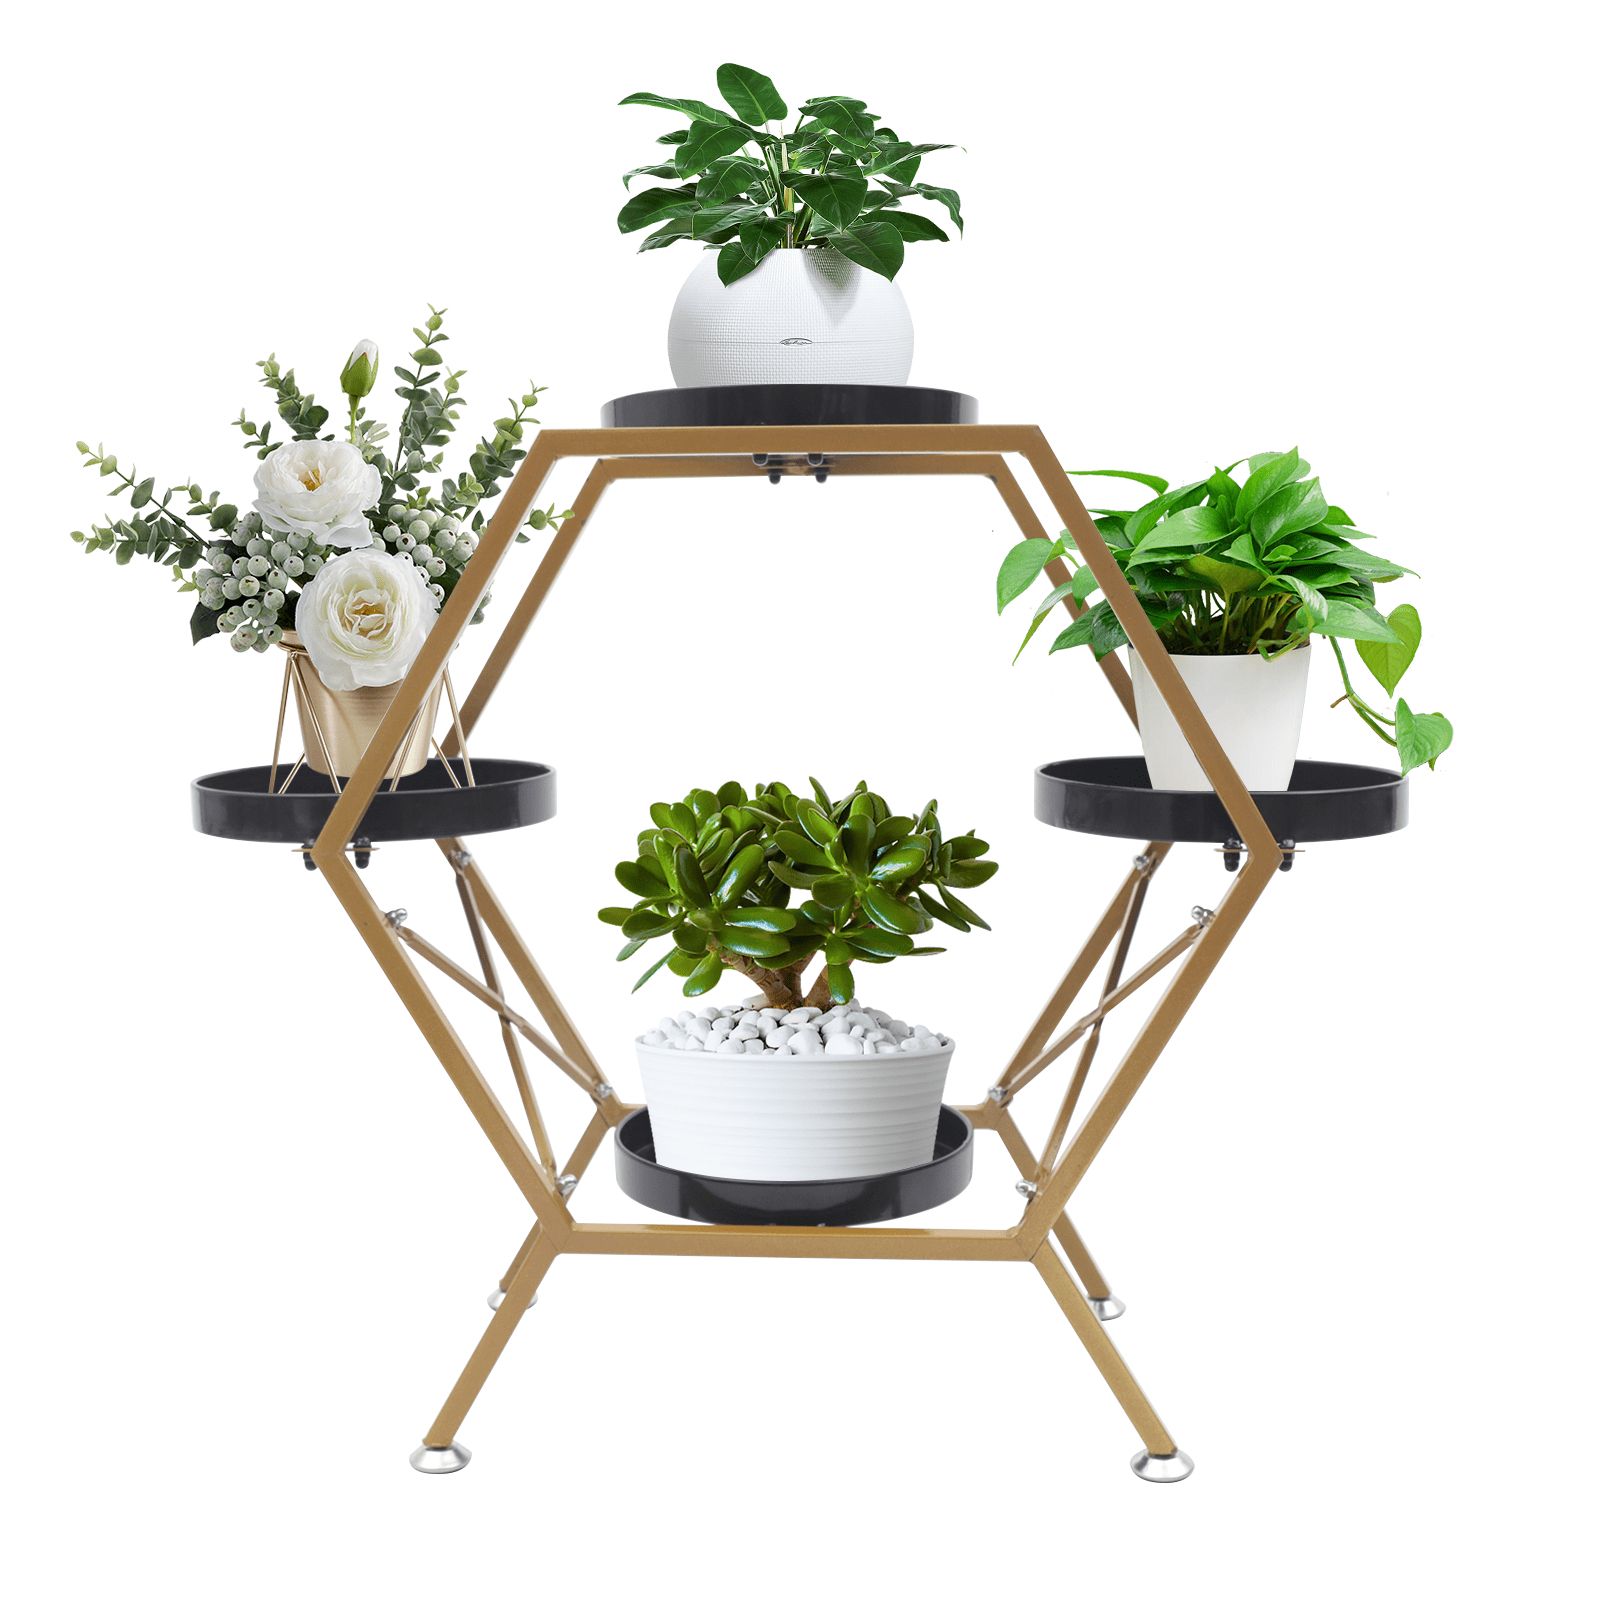 Ethedeal Hexagon Gold Metal Plant Stand 4 Trays Flower Pot Holder Display  Garden Balcony – Walmart Intended For Hexagon Plant Stands (View 1 of 15)